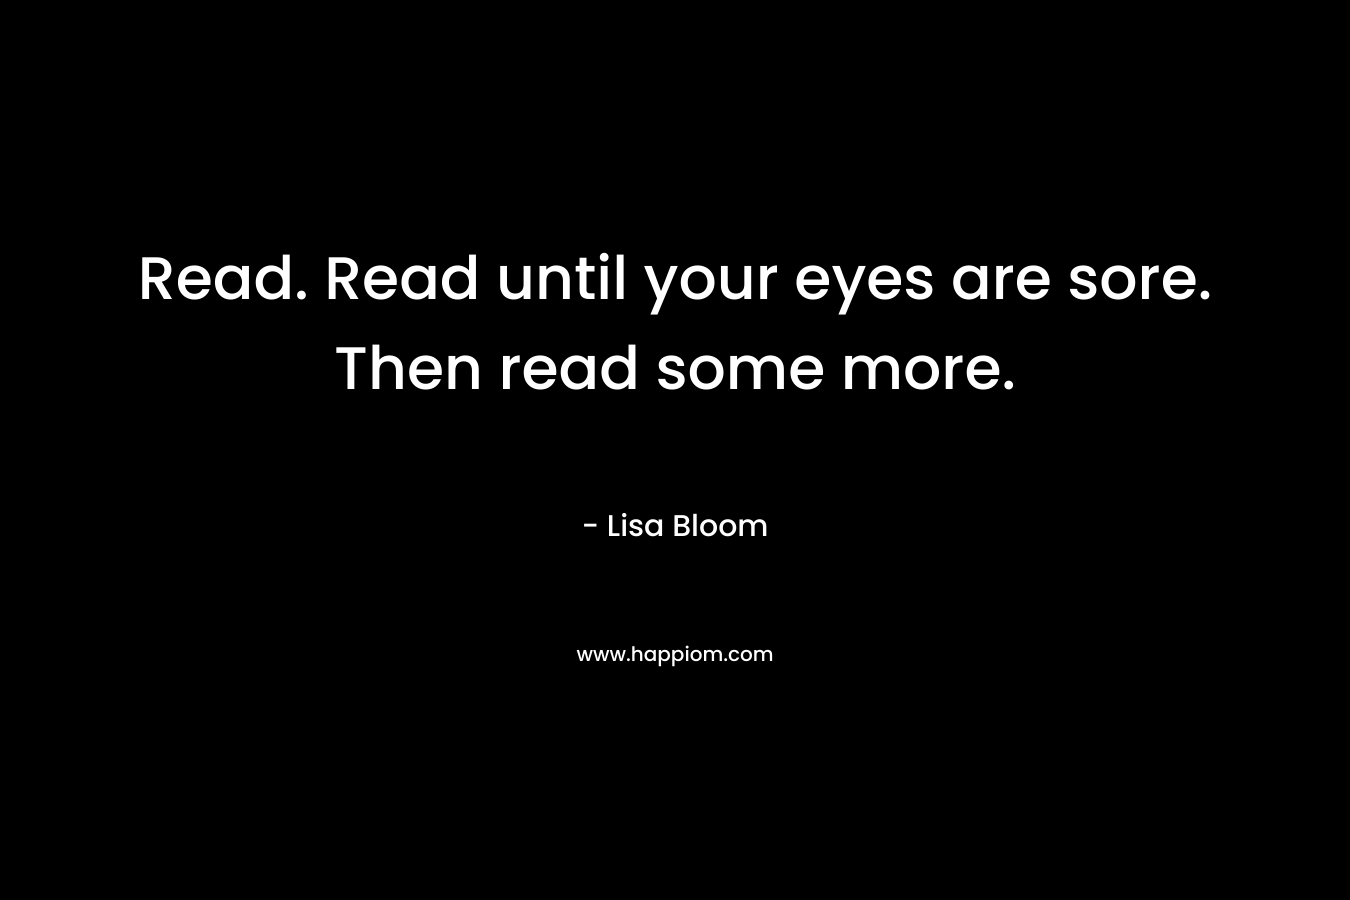 Read. Read until your eyes are sore. Then read some more.